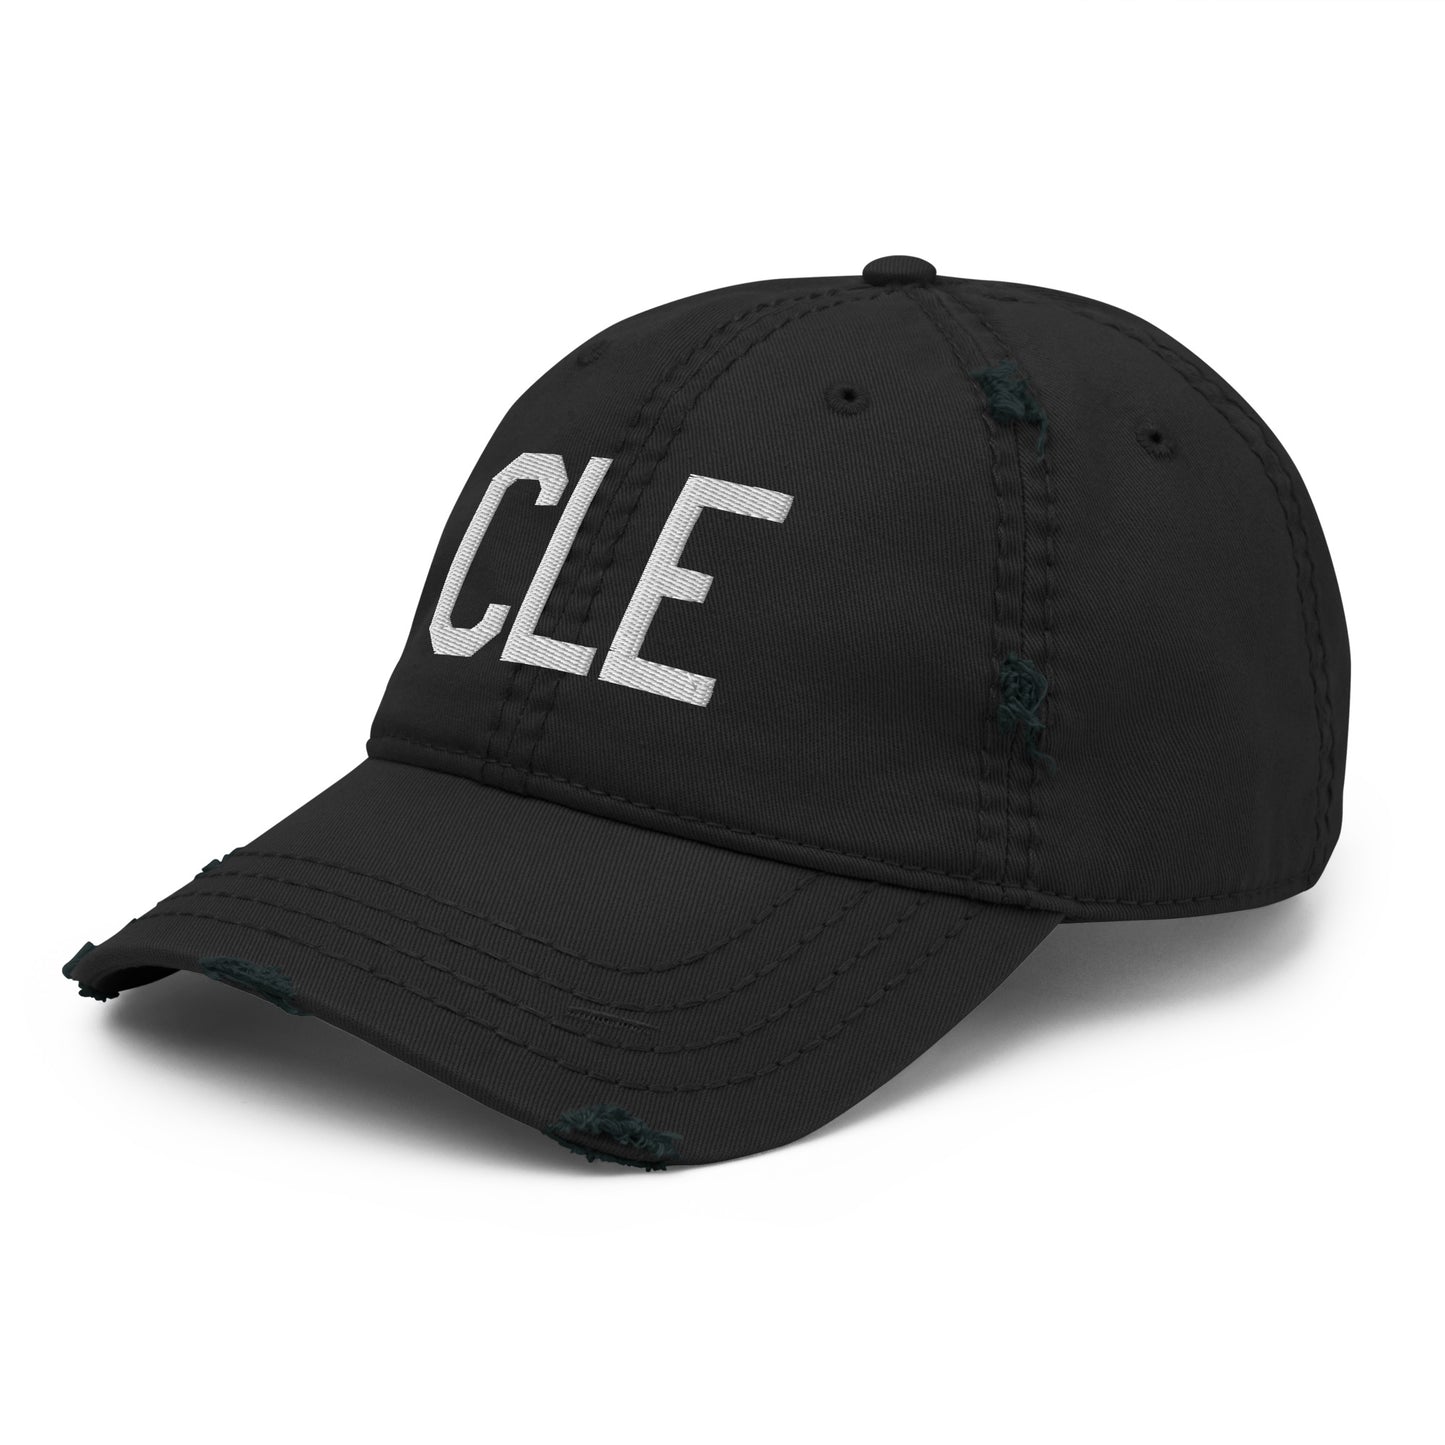 Airport Code Distressed Hat - White • CLE Cleveland • YHM Designs - Image 11